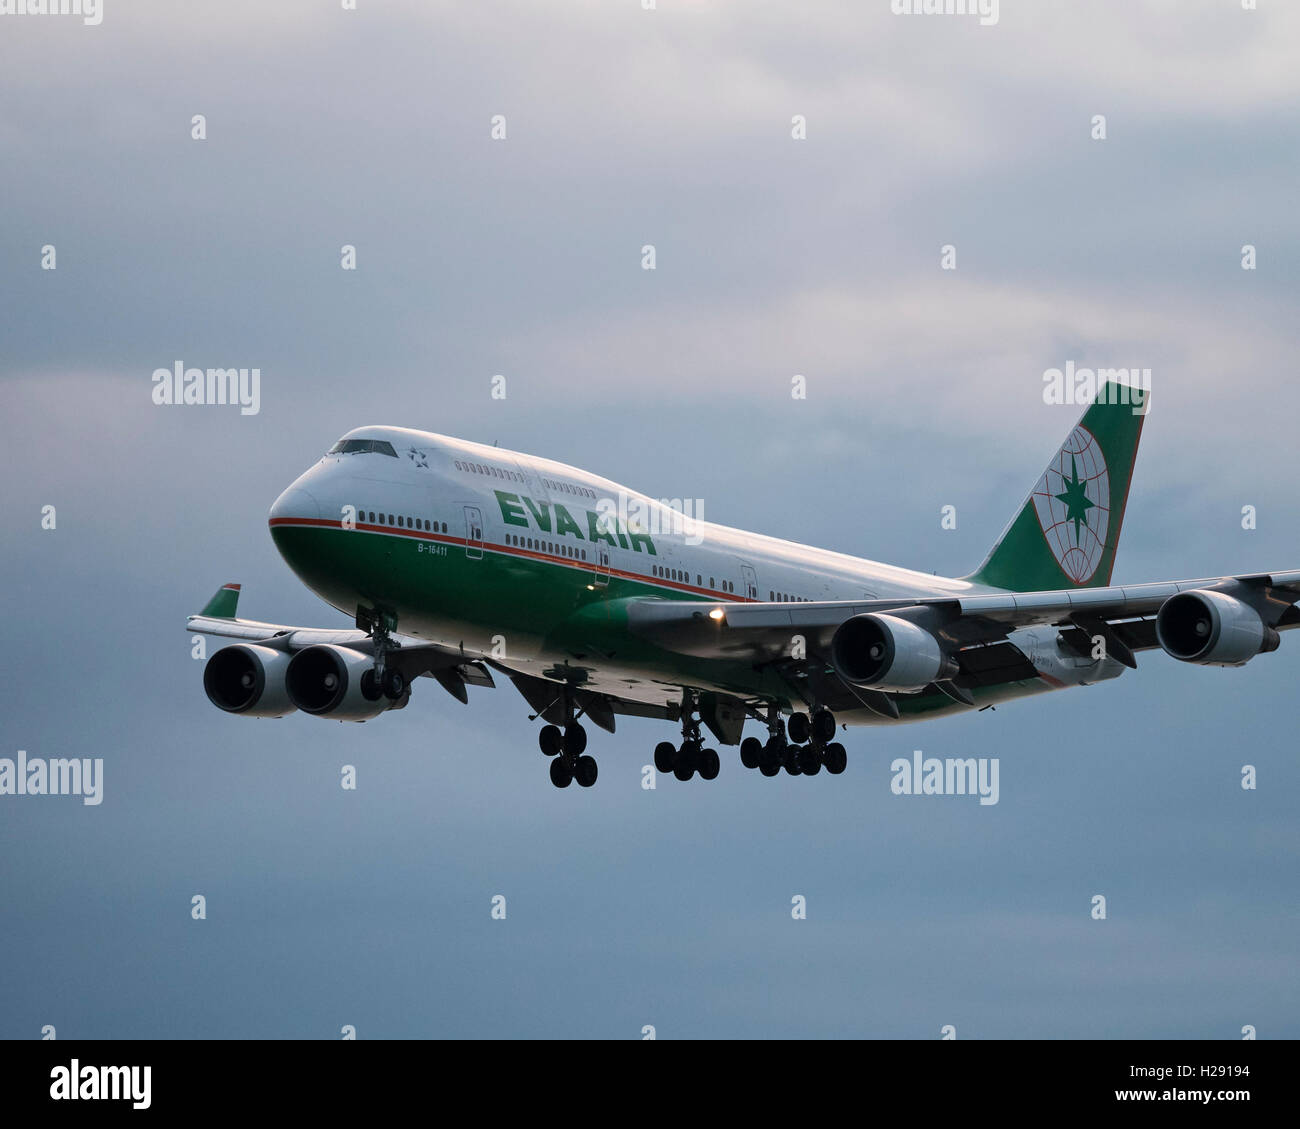 EVA Air Boeing 747-400 B-16411 jumbo-jet airliner final approach for landing, Vancouver International Airport, Canada Stock Photo